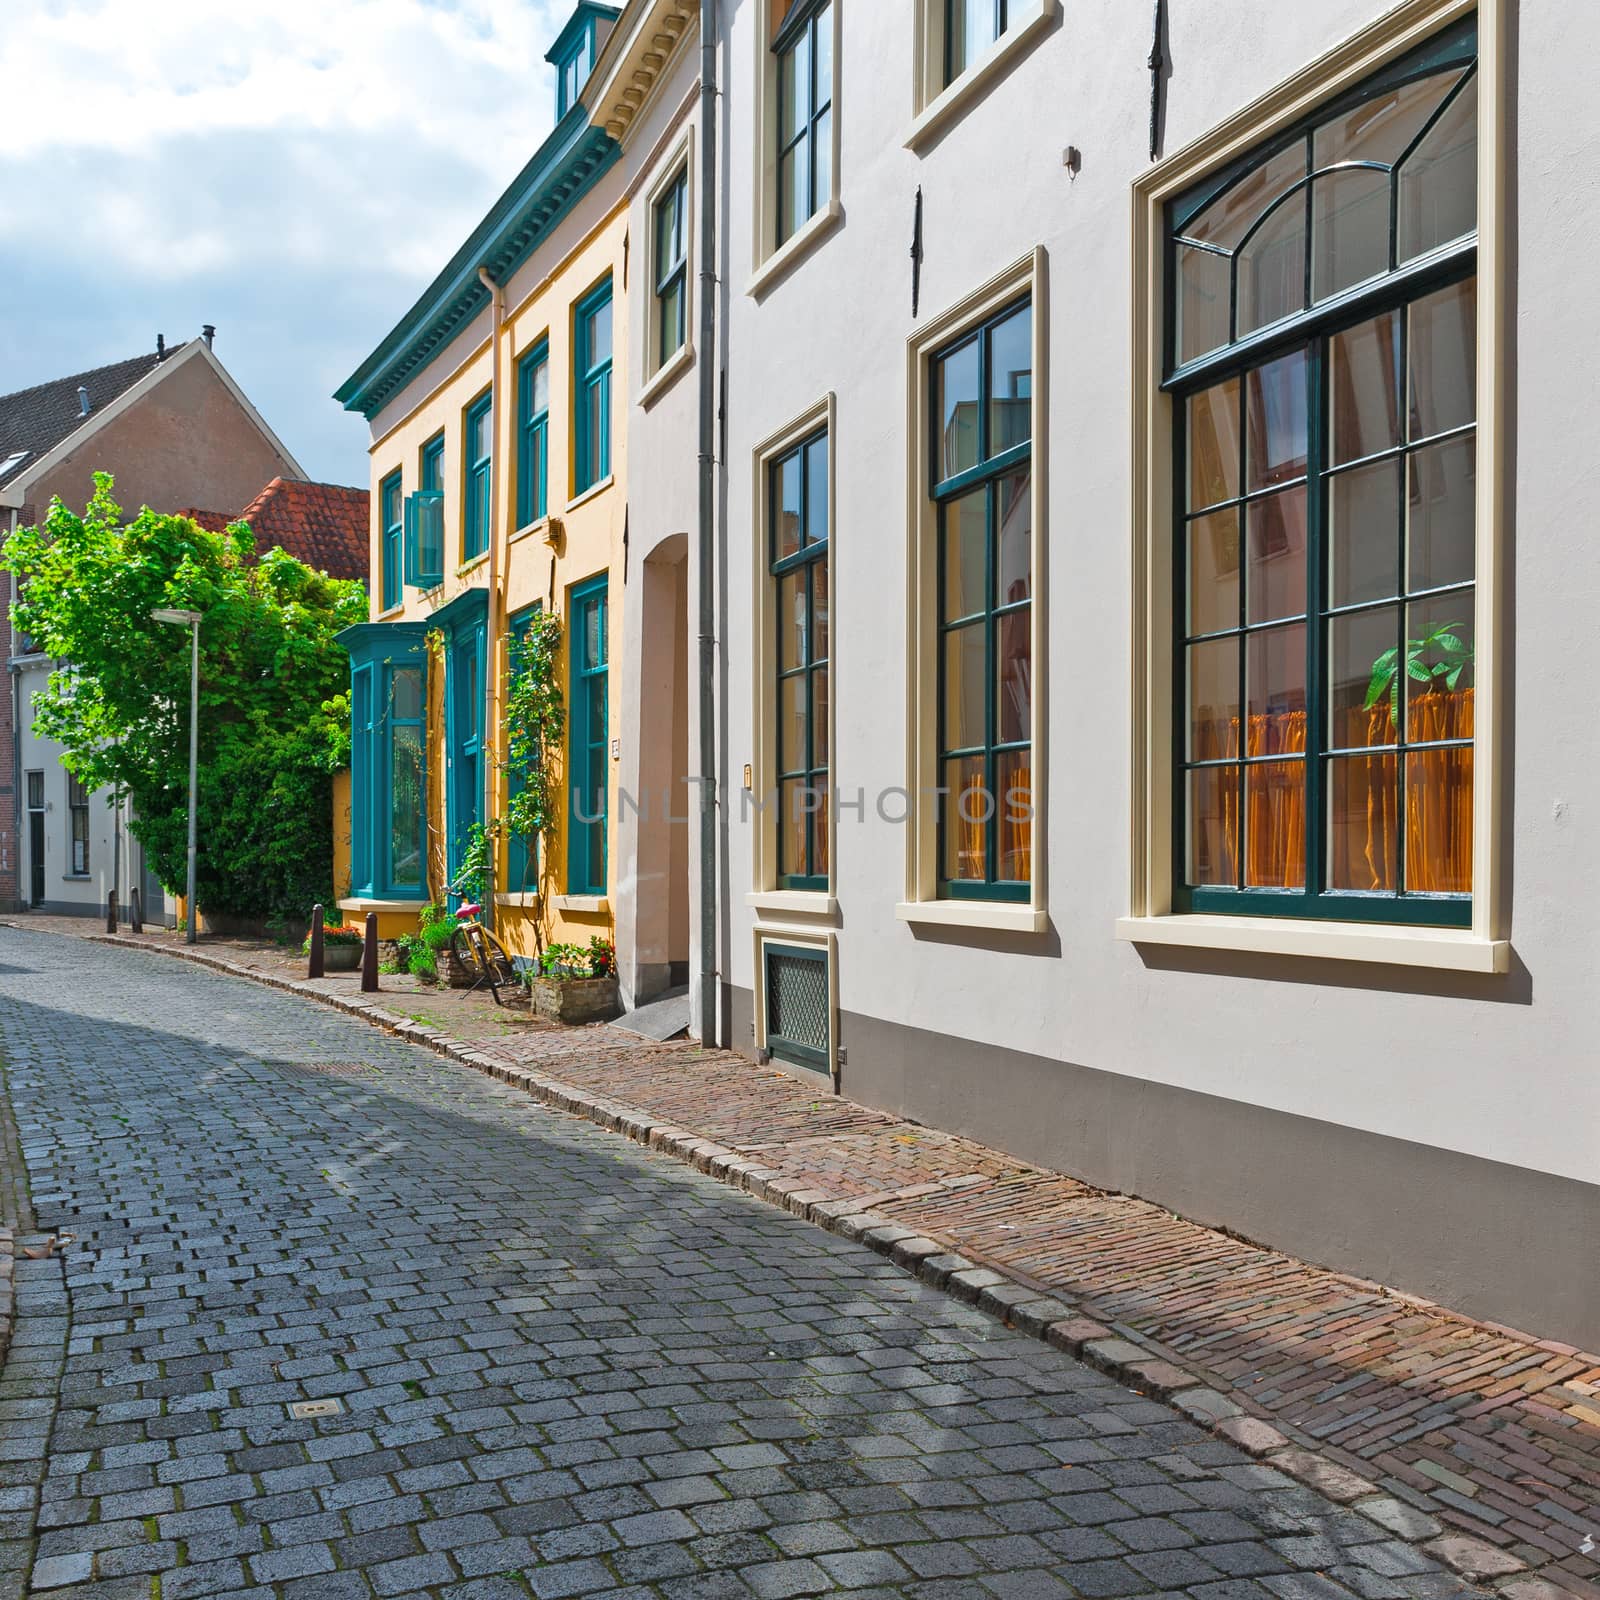 The Narrow Street in the Dutch City of Zutphen